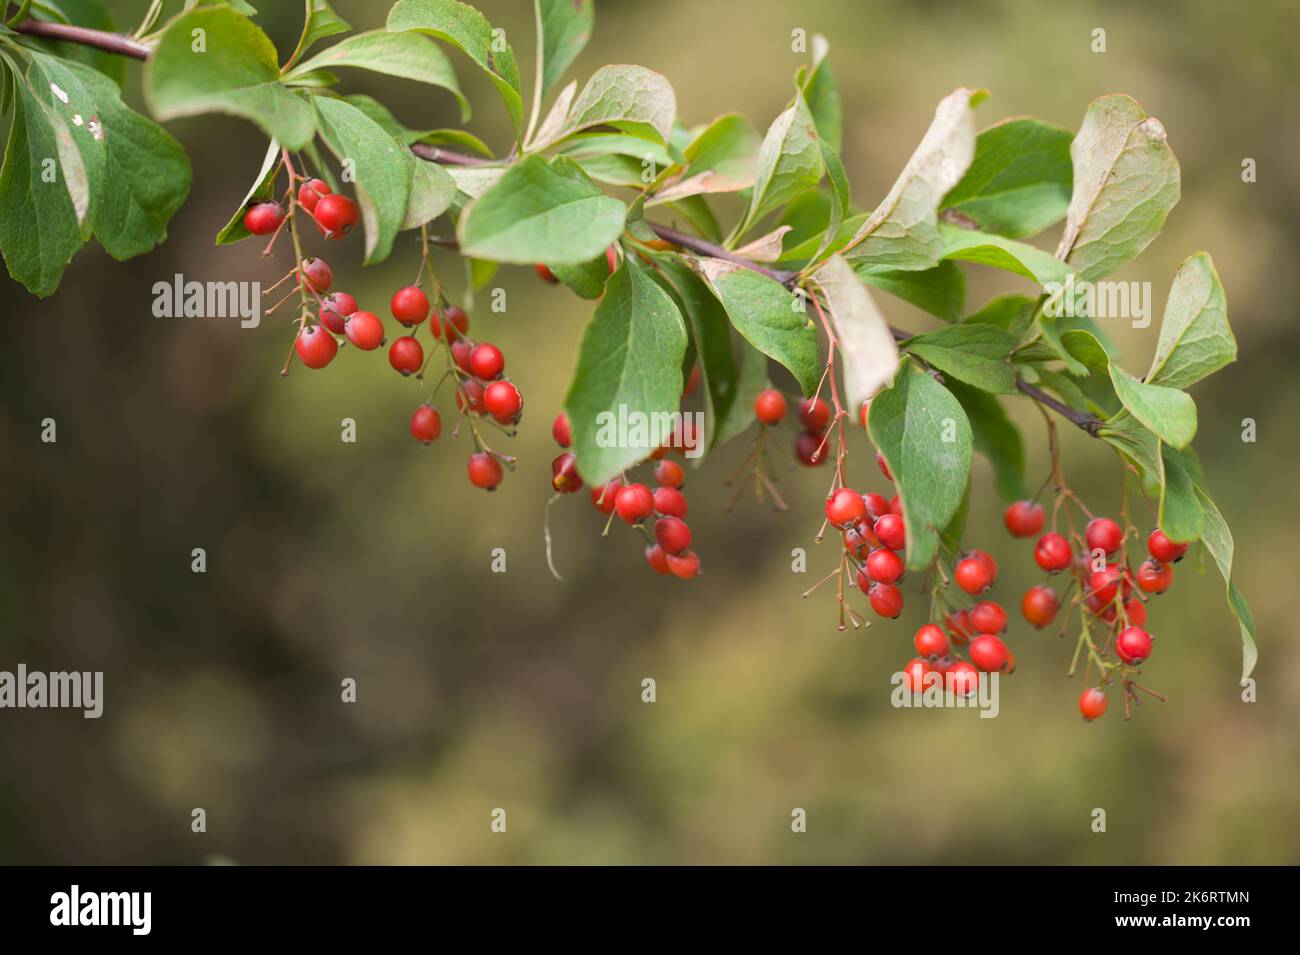 Branch of Korean barberry with red berries in a garden Stock Photo